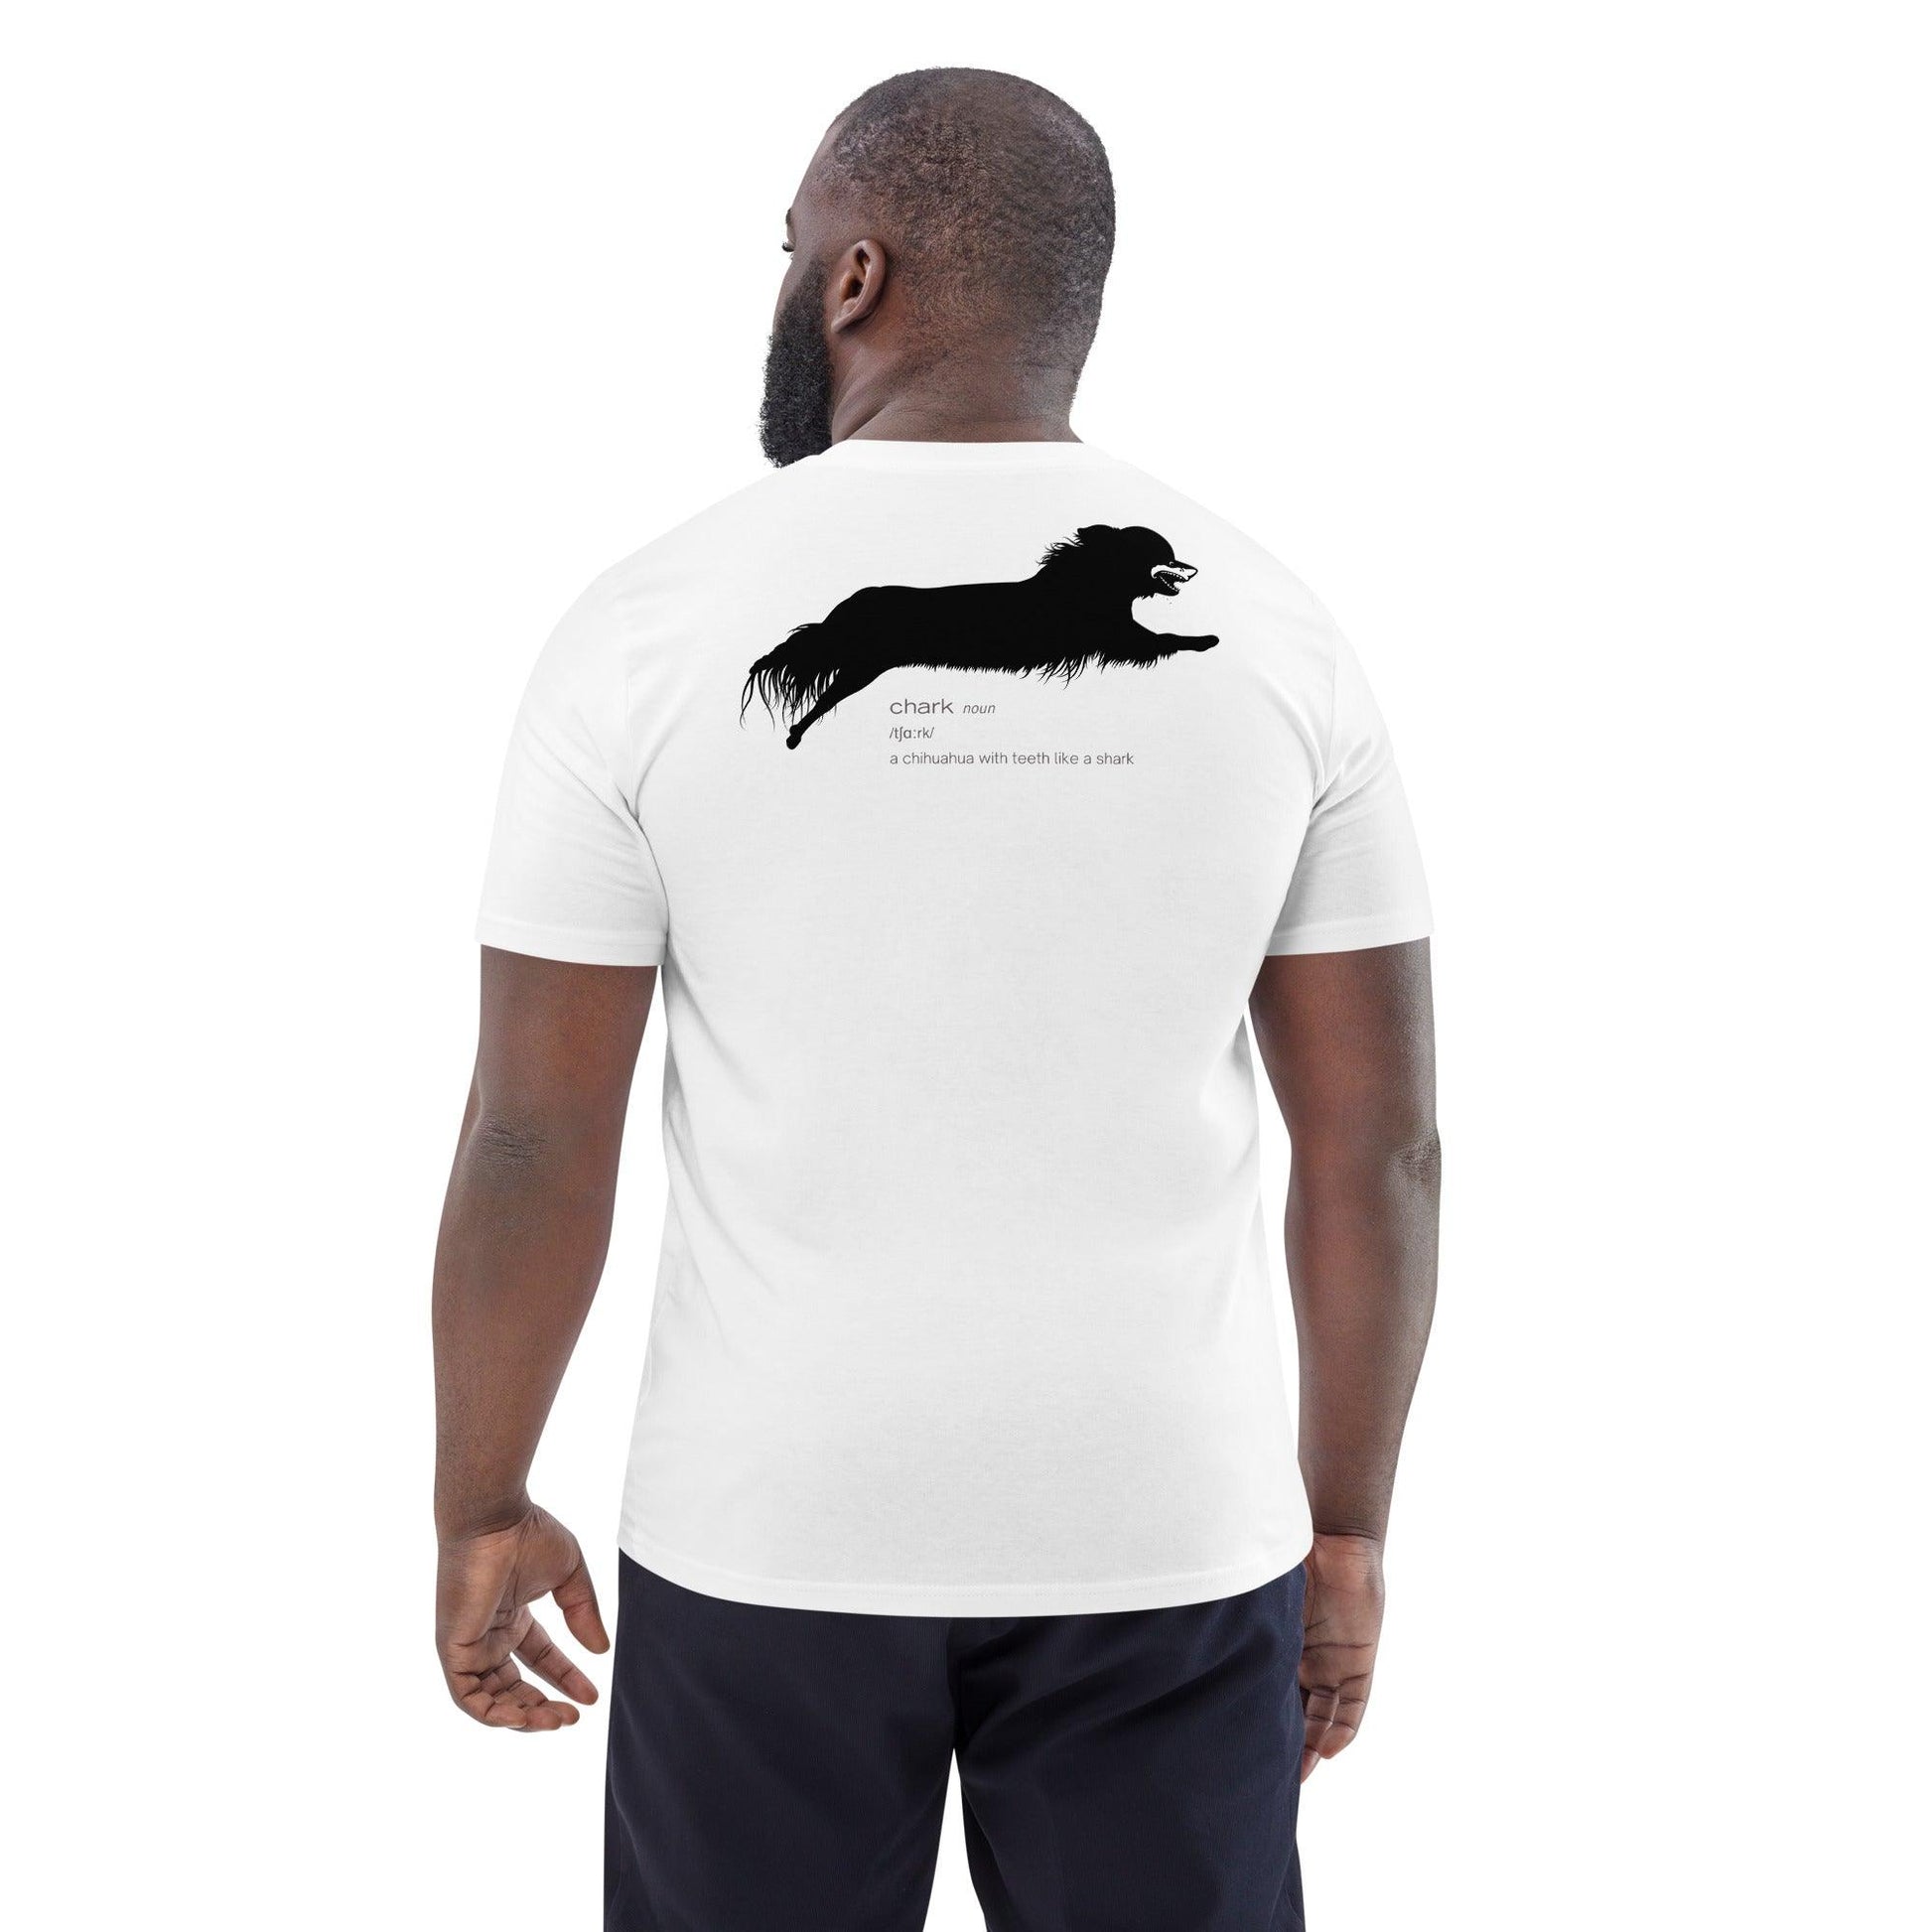 Chihuahua + Shark = Chark unisex t-shirt. Front: black silhouette of a longhaired chihuahua with the face of a great white shark + "Chark"  in cursive font. Back: another shark-faced chihuahua silhouette running across the shoulder blades + dictionary entry of the noun "chark": a chihuahua with teeth like a shark. 100% pure organic cotton. White. Unisex in sizes for men and women. Design by Renate Kriegler, owner of Chimigos - for the love of chihuahuas. More on chimigos.com